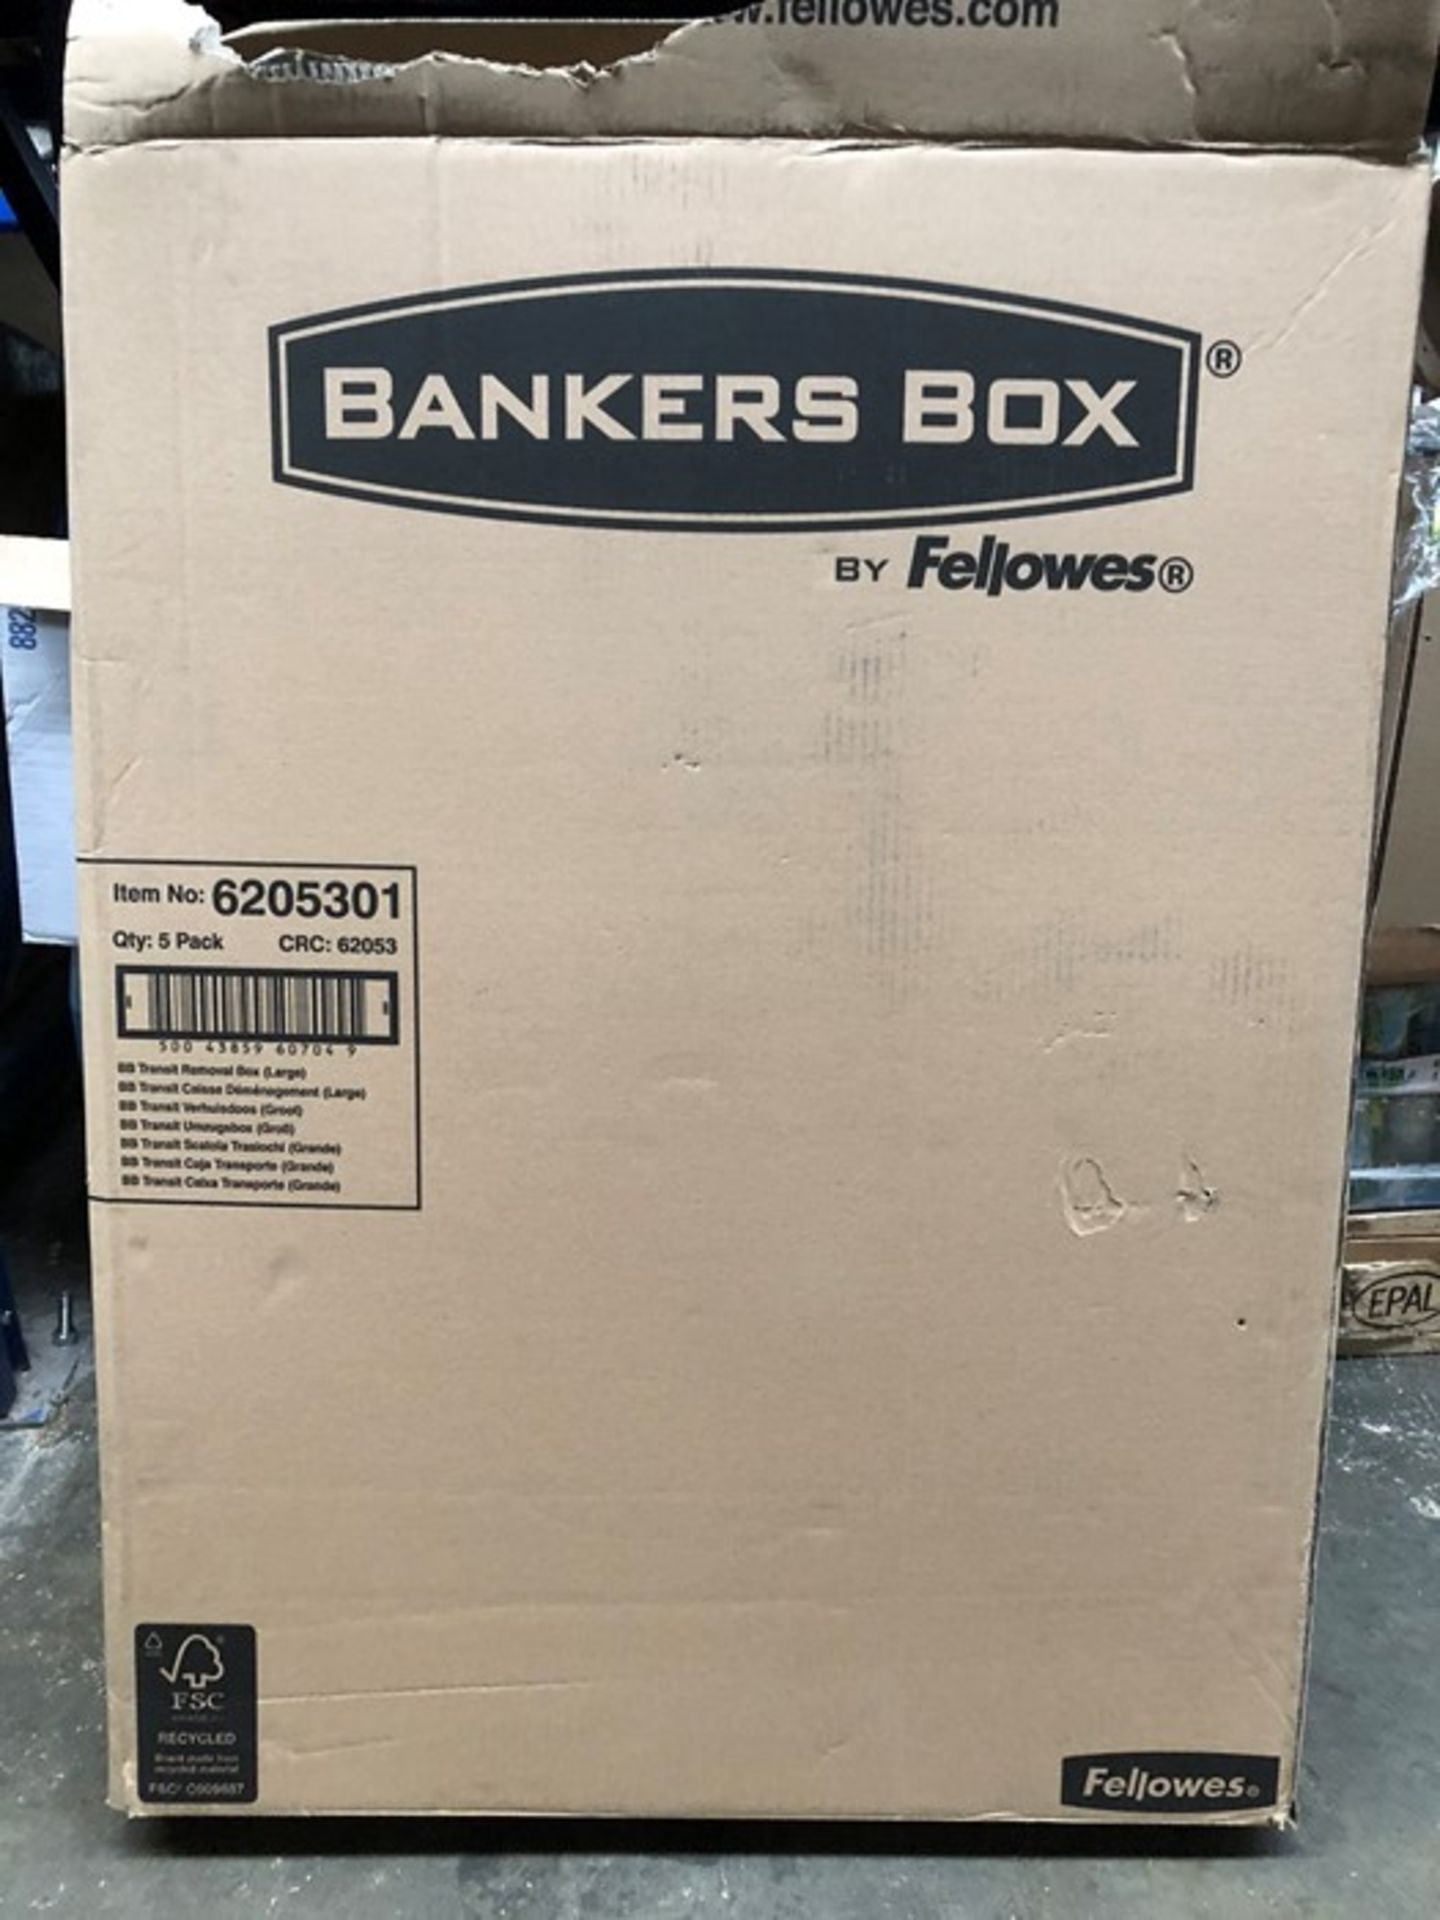 1 BOX OF FELLOWES BANKERS BOXES - 5 LARGE BOXES IN PER BOX / PN - 873 (PUBLIC VIEWING AVAILABLE)